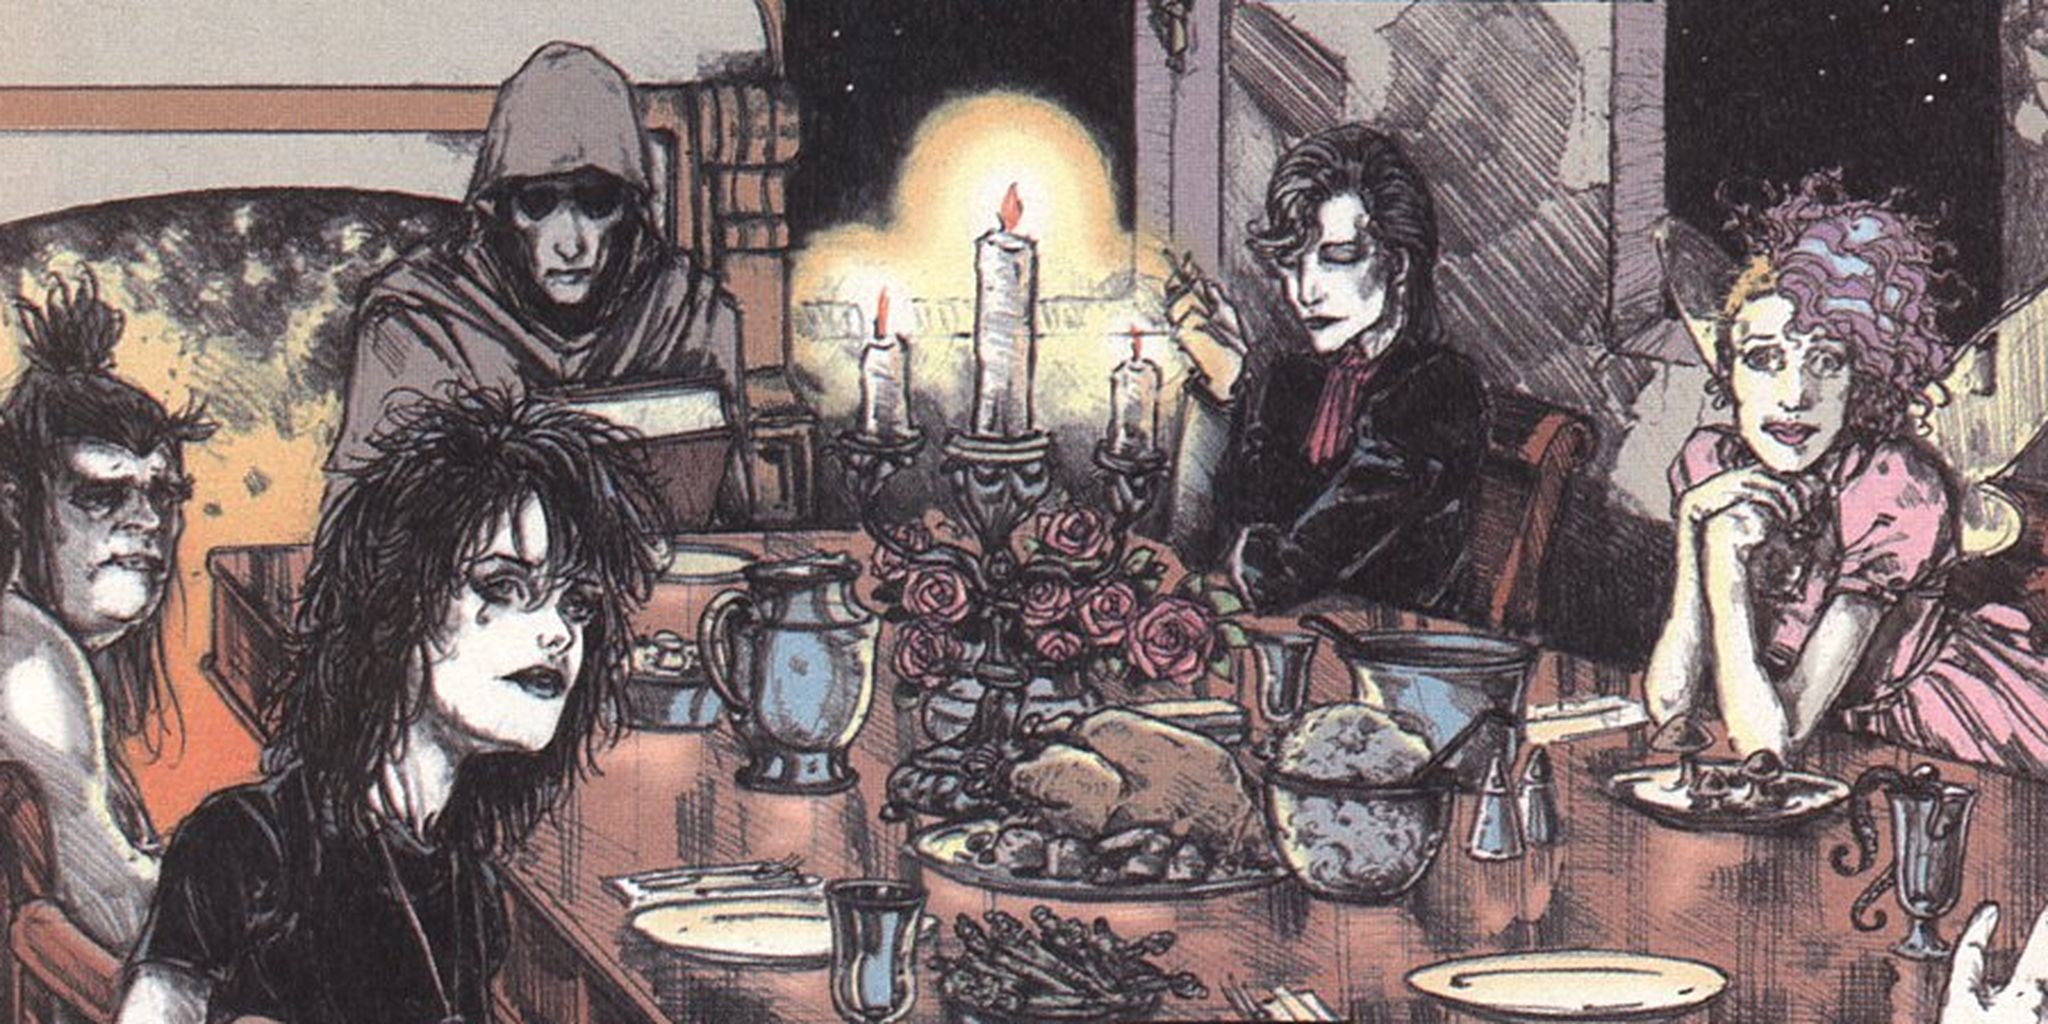 The Endless at the dinner table in Sandman.